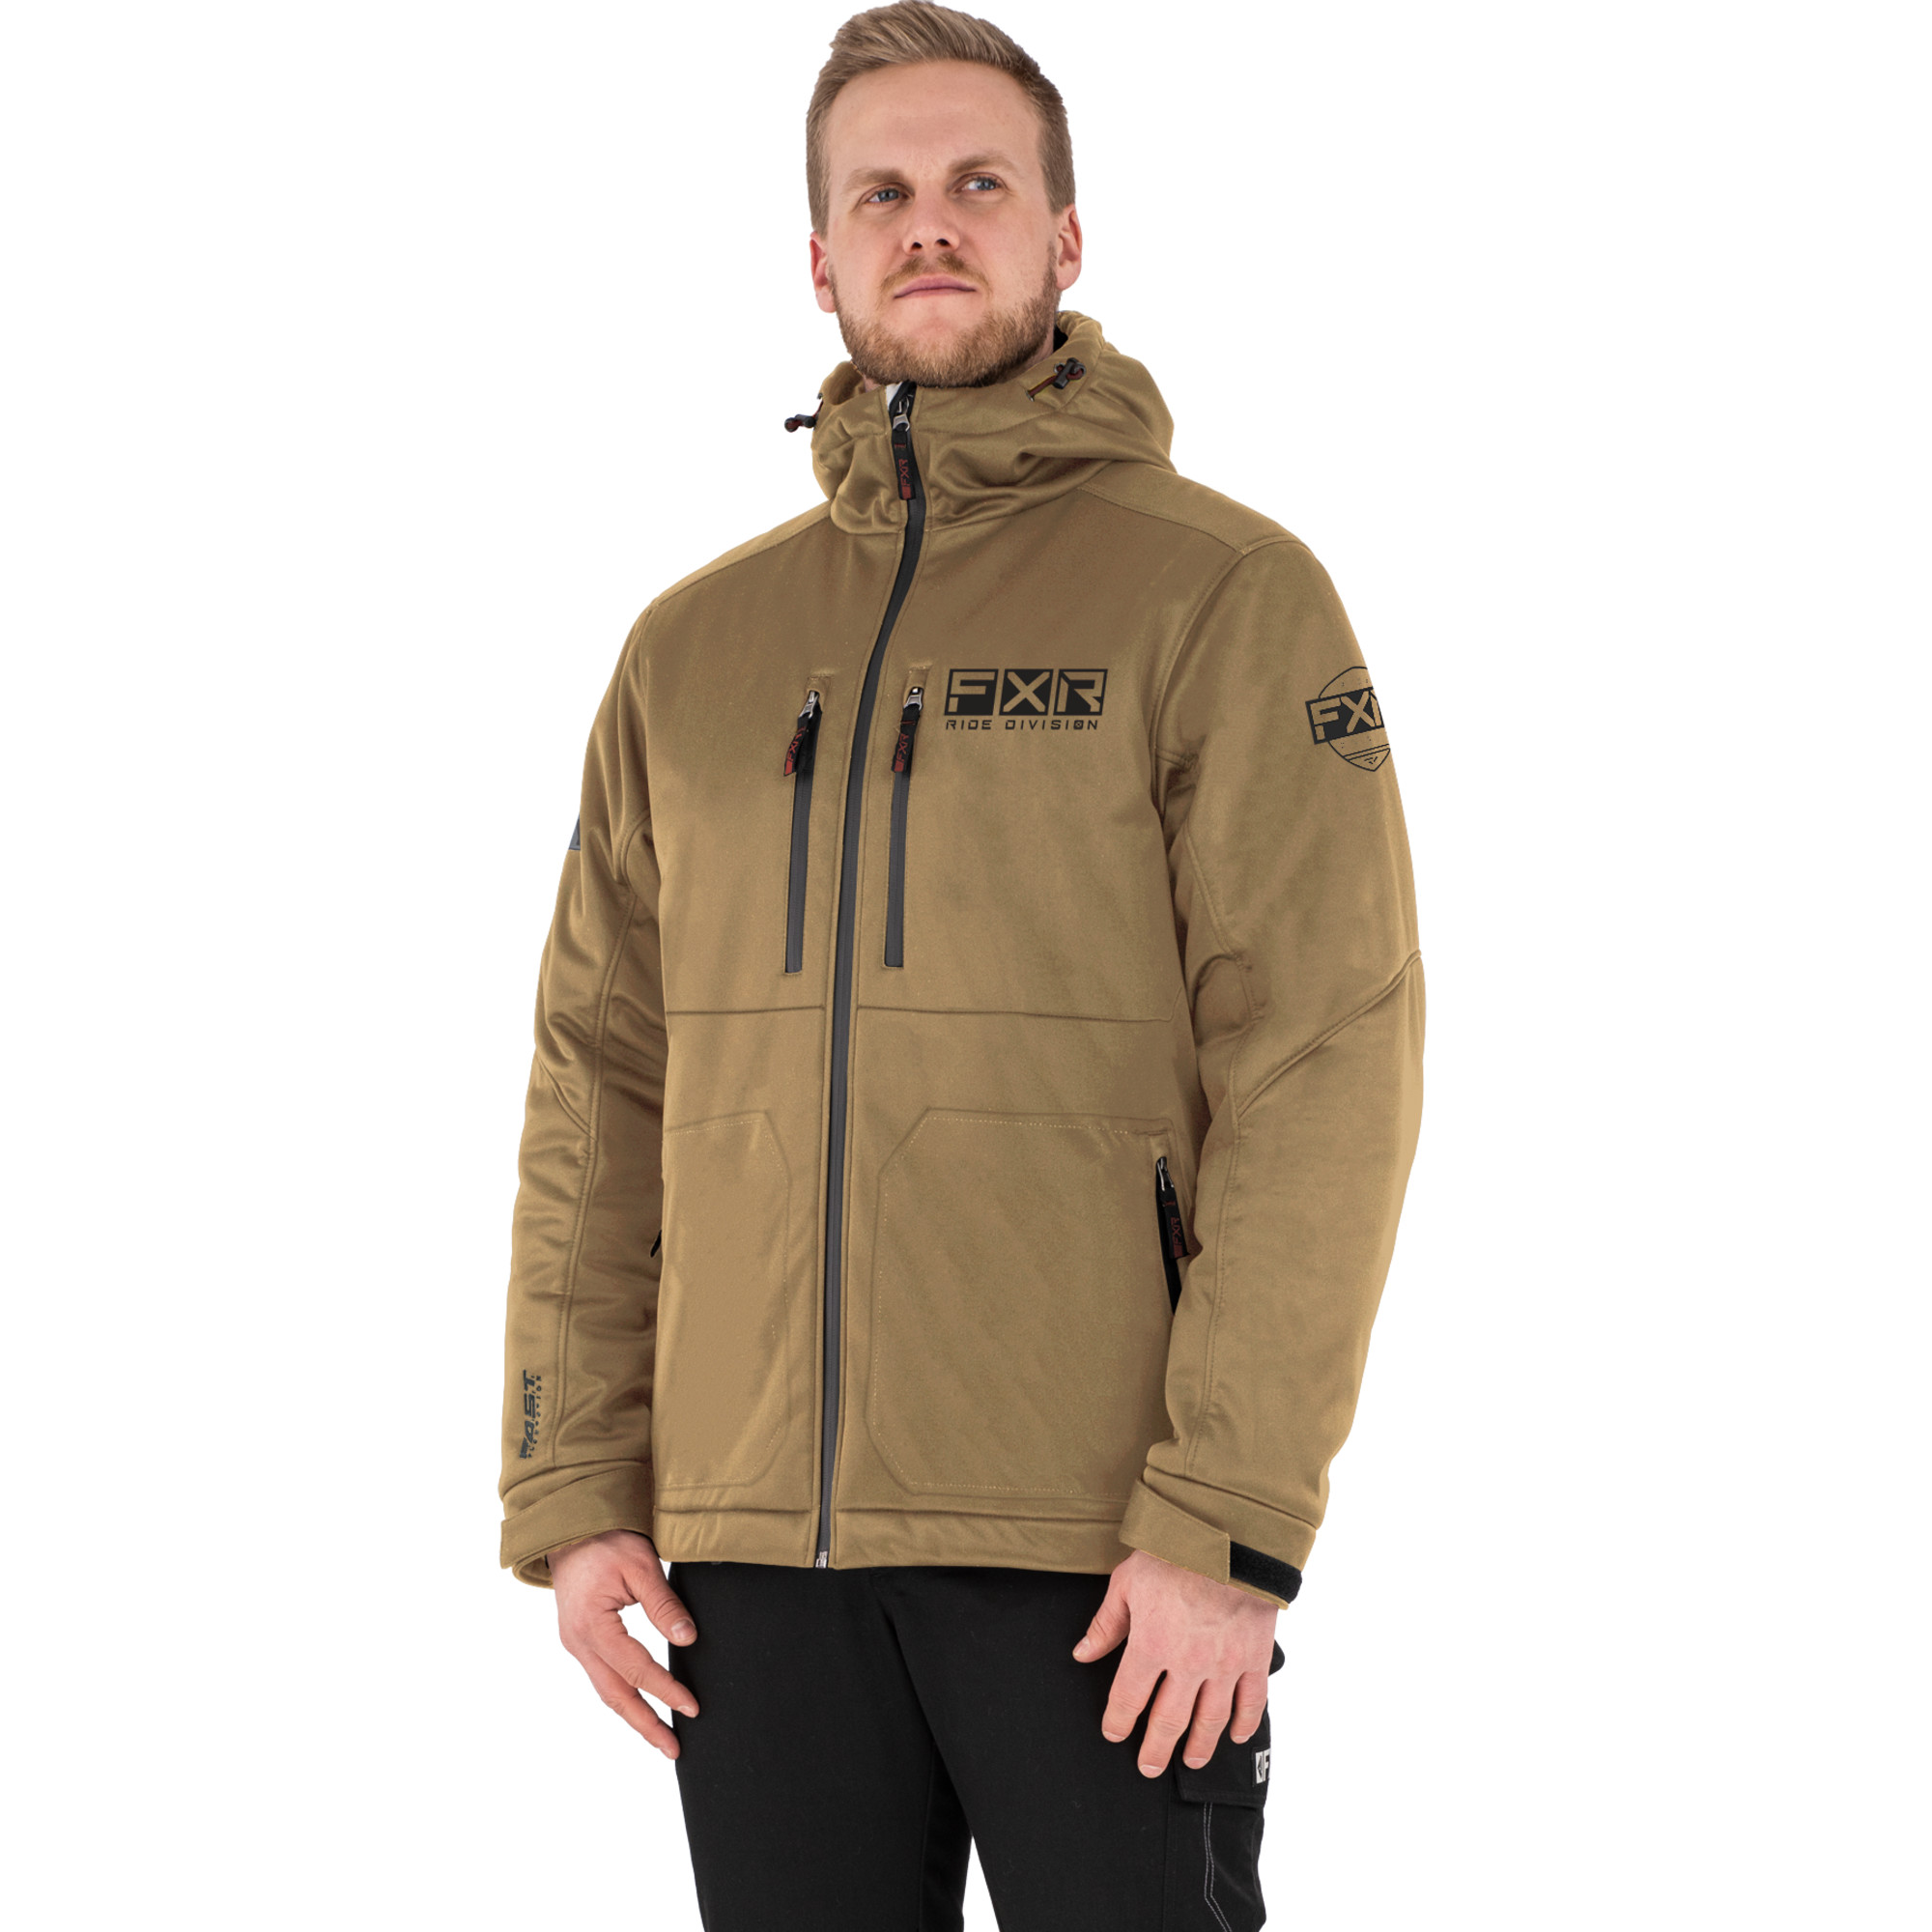 fxr racing jackets for mens men task insulated softshell